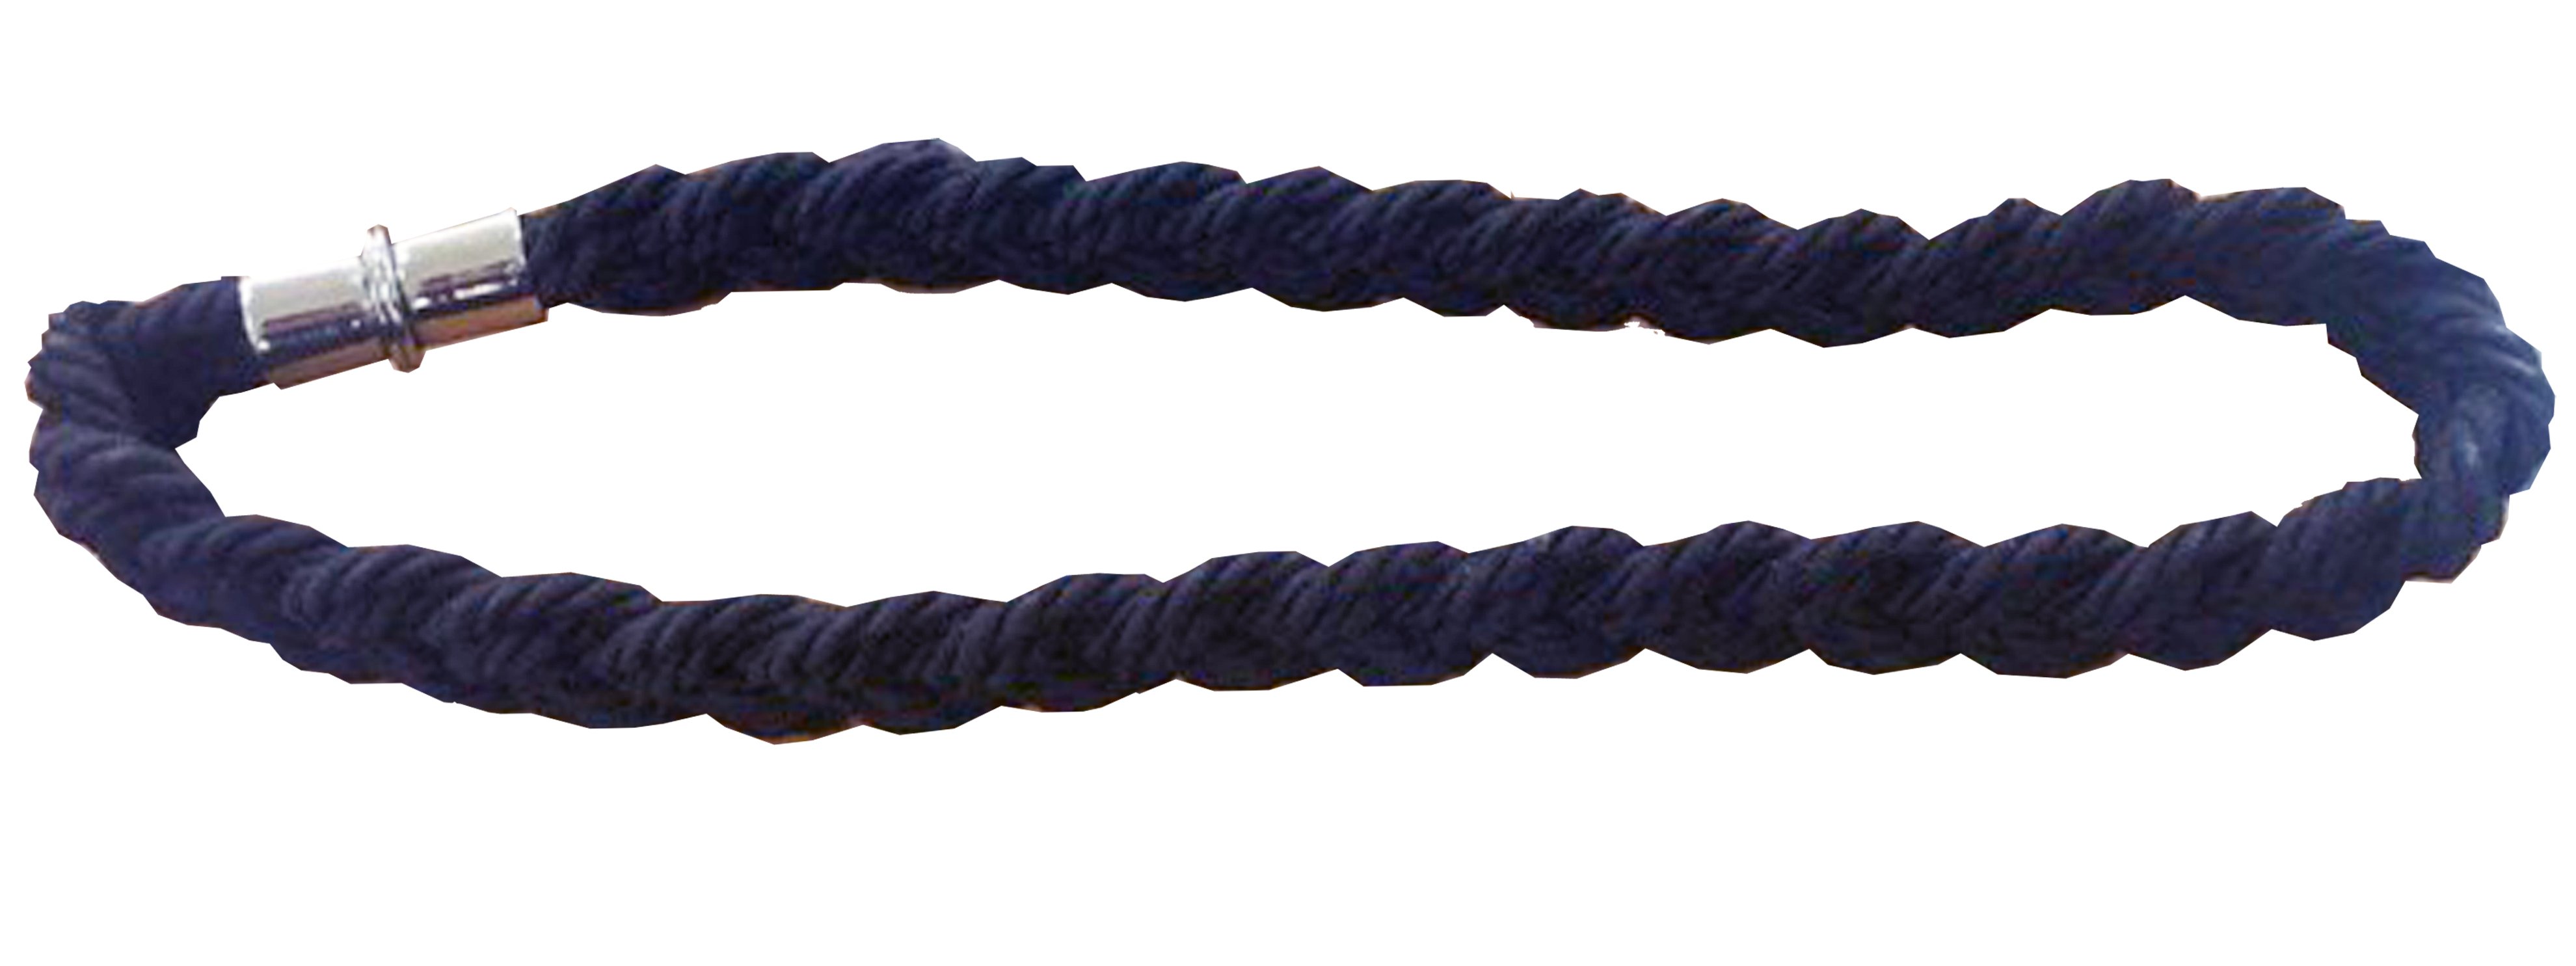 PAIR 2 pieces Natural Cotton Curtain Tie Backs with Rope Plaited Weave - Navy Blue 80cm